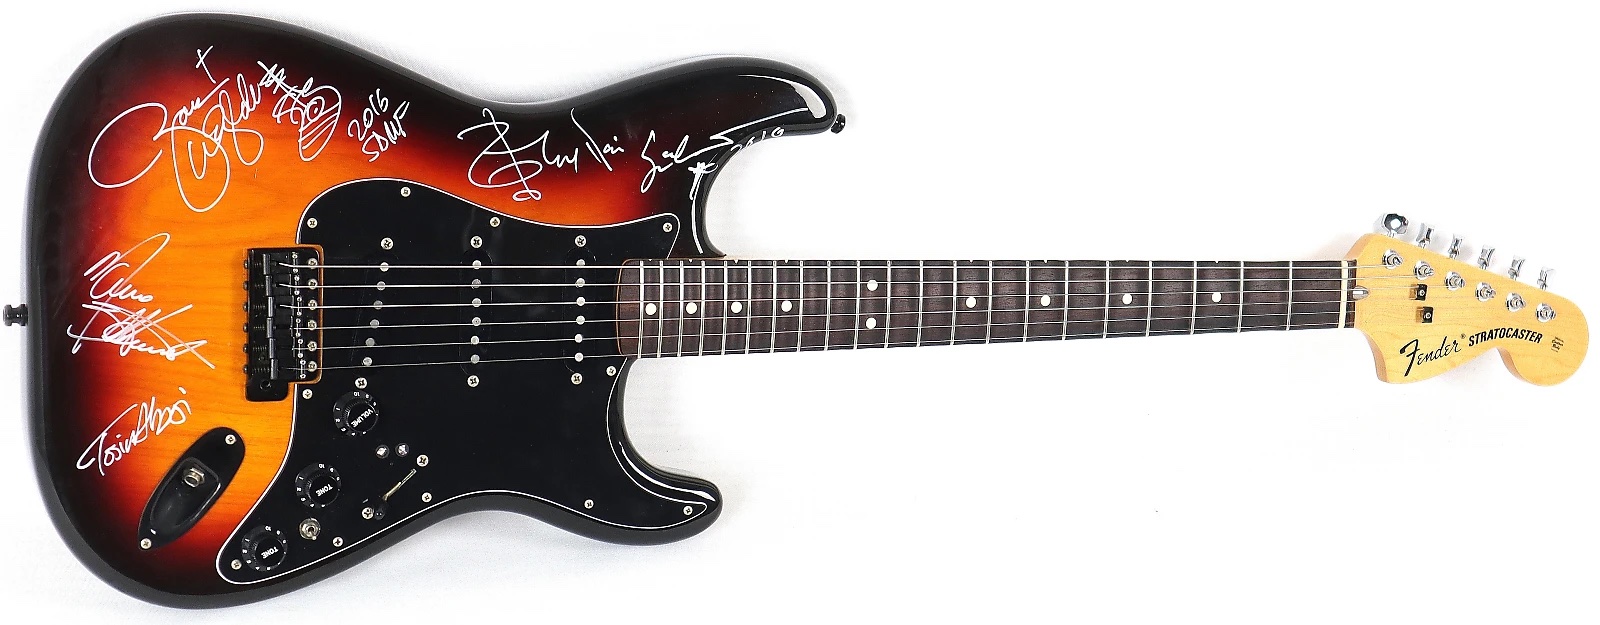 A Fender Stratocaster signed by all five Generation Axe guitarists